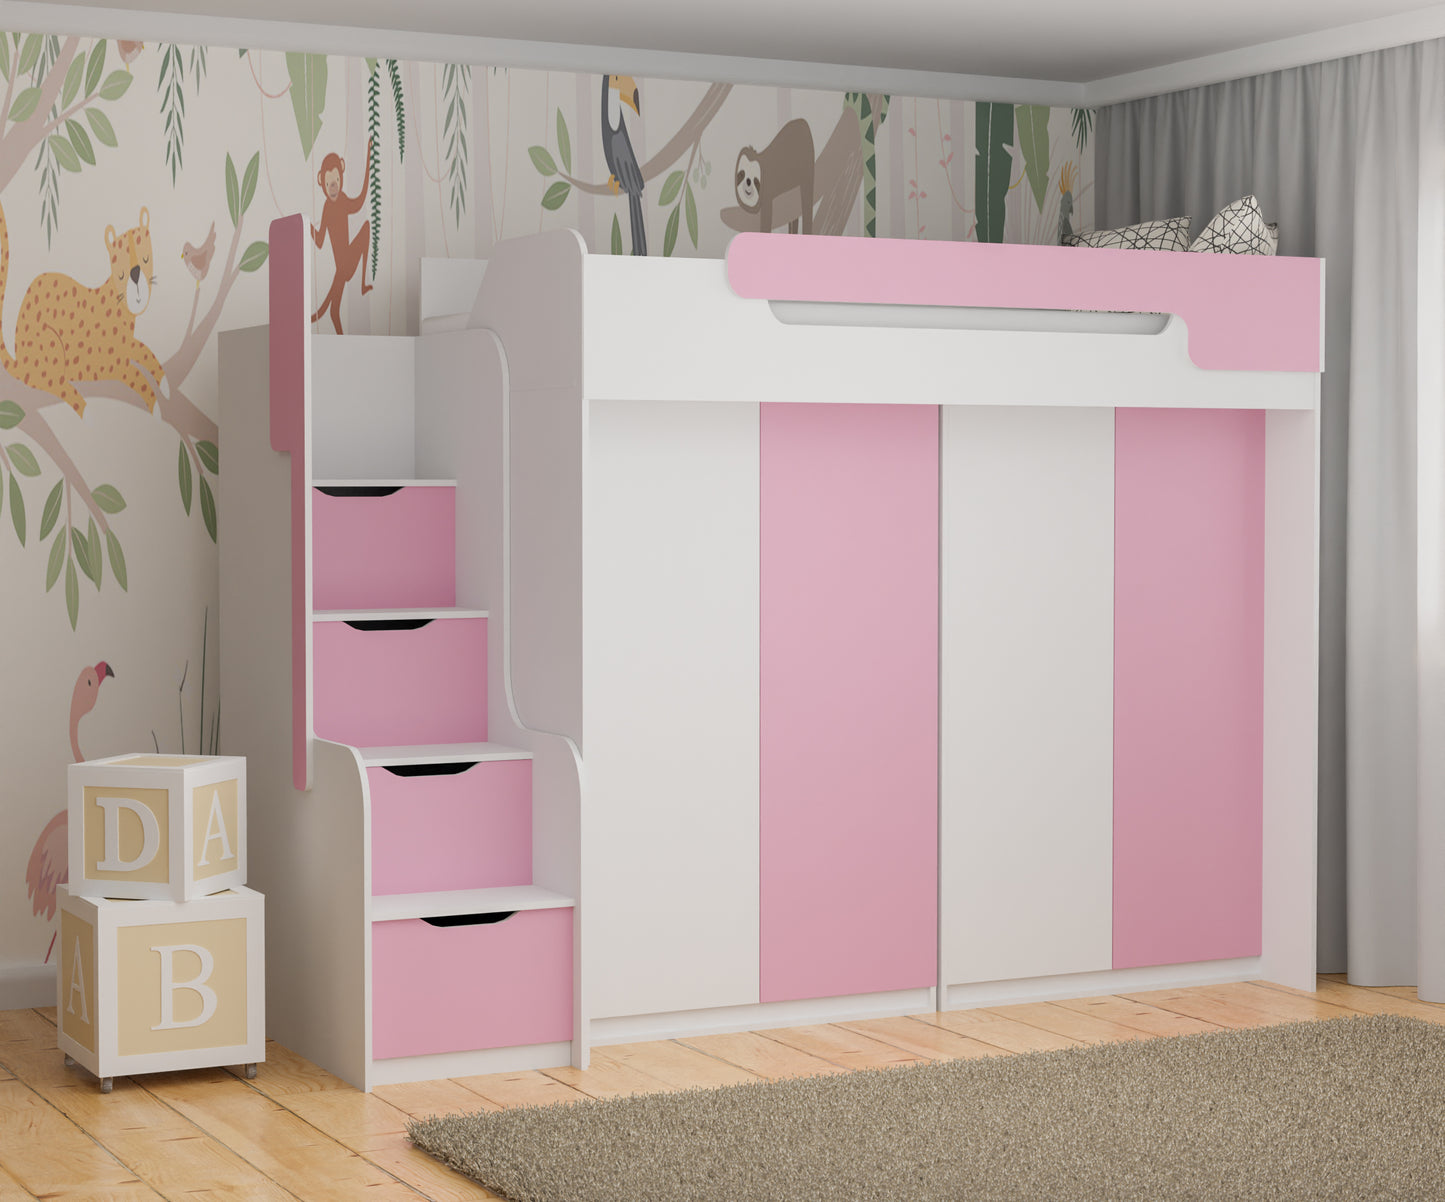 DORIANA - High Sleeper Bed with Stairs and Wardrobe, 3 Variations, 6 Colour Inserts